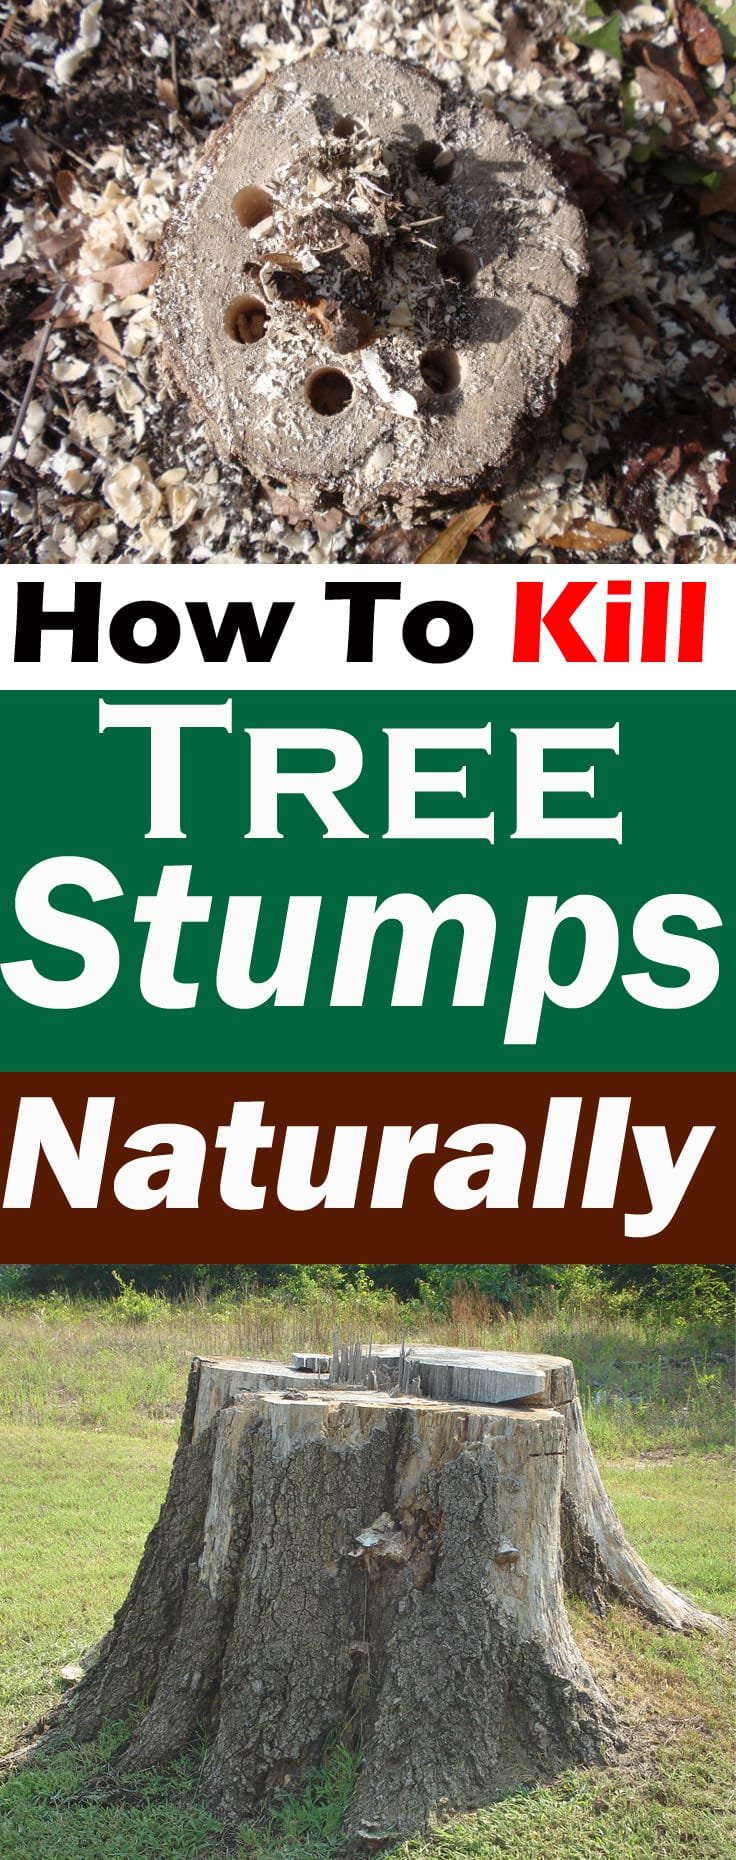 Killing tree stumps naturally is safe and doesn't require chemicals. In this article you'll learn how to kill tree stumps naturally.